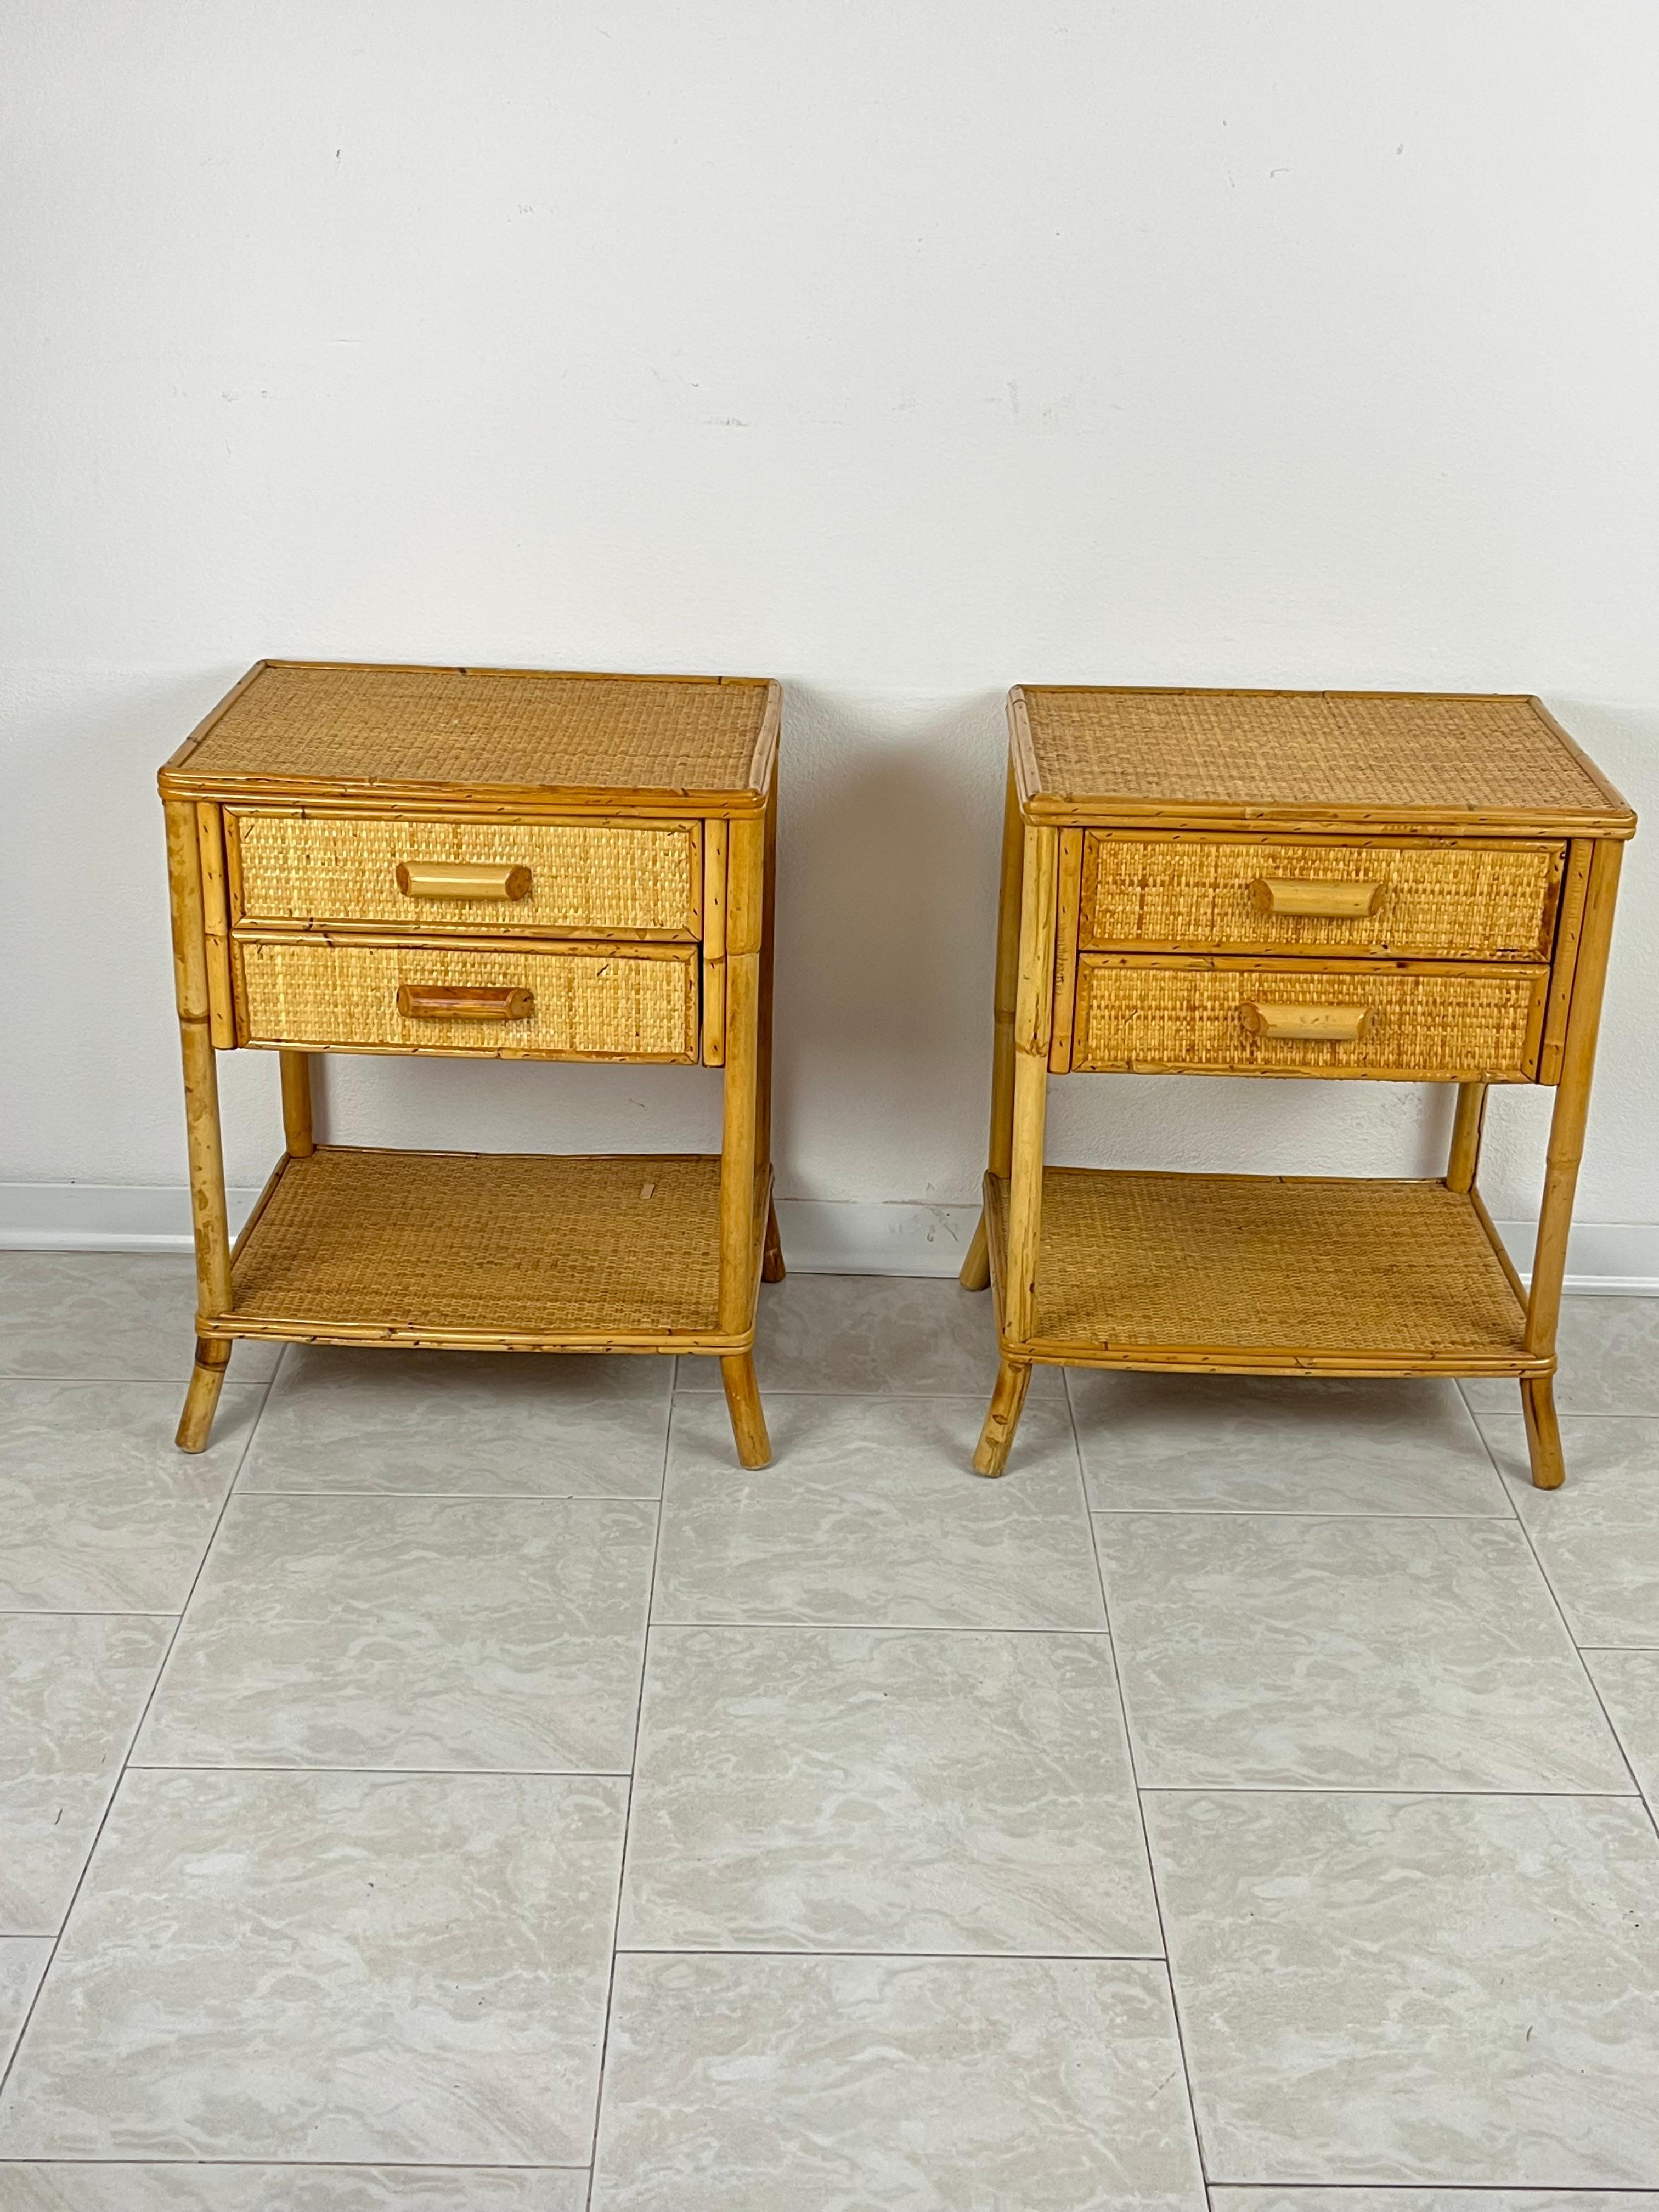 Pair of Vintage bamboo and rattan bedside tables, Italy, 1970s
Good condition, small signs of wear. Each has two drawers.
Found in a Sicilian villa.